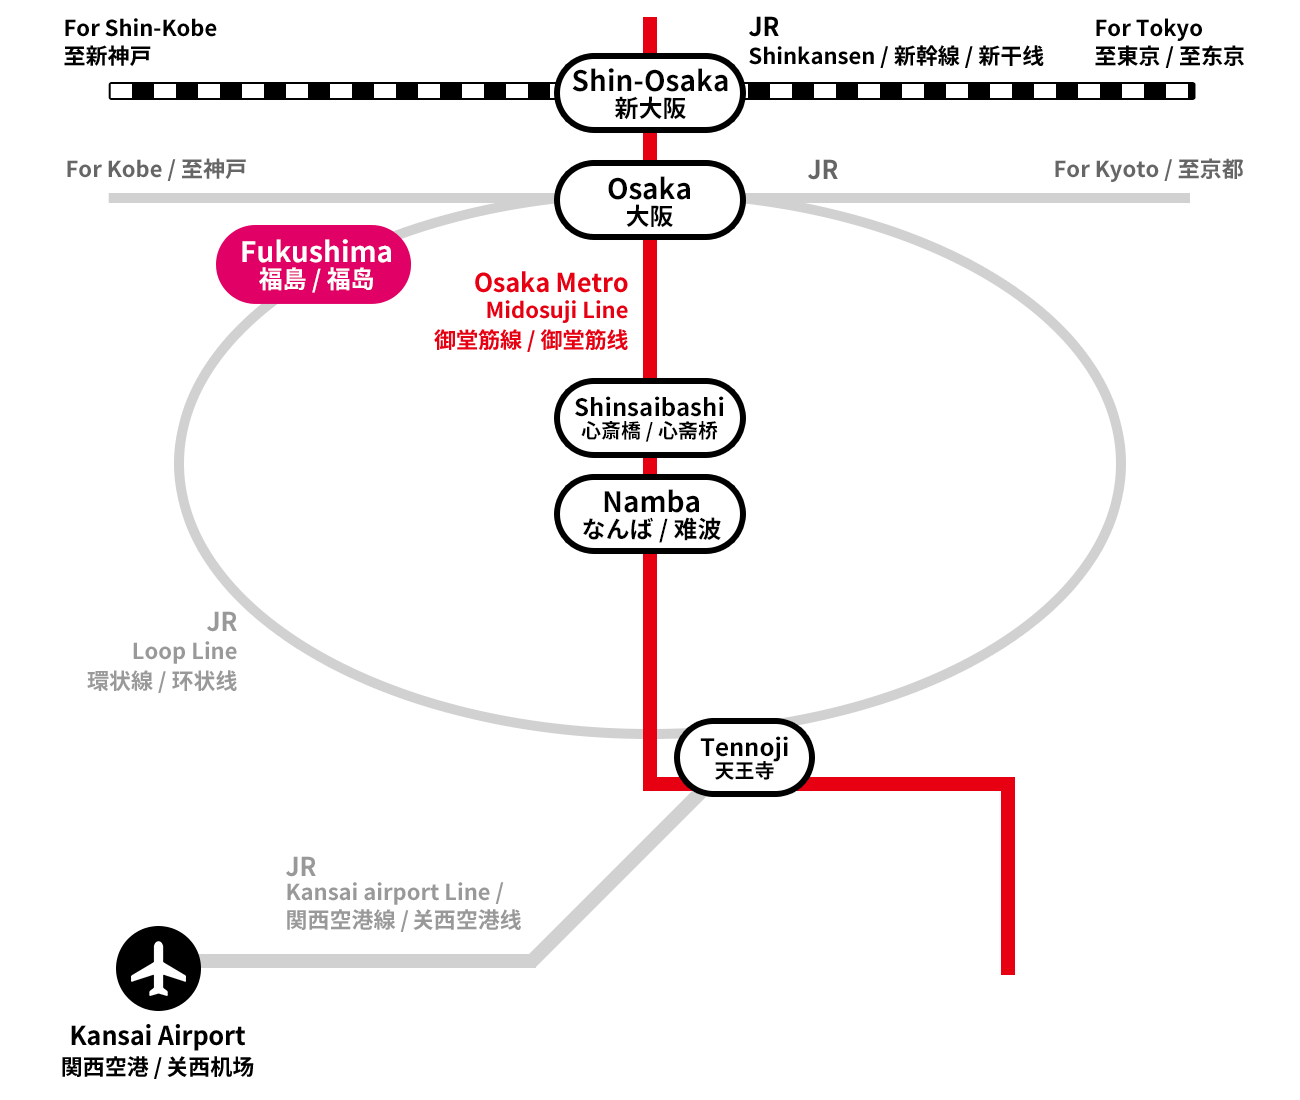 Route map